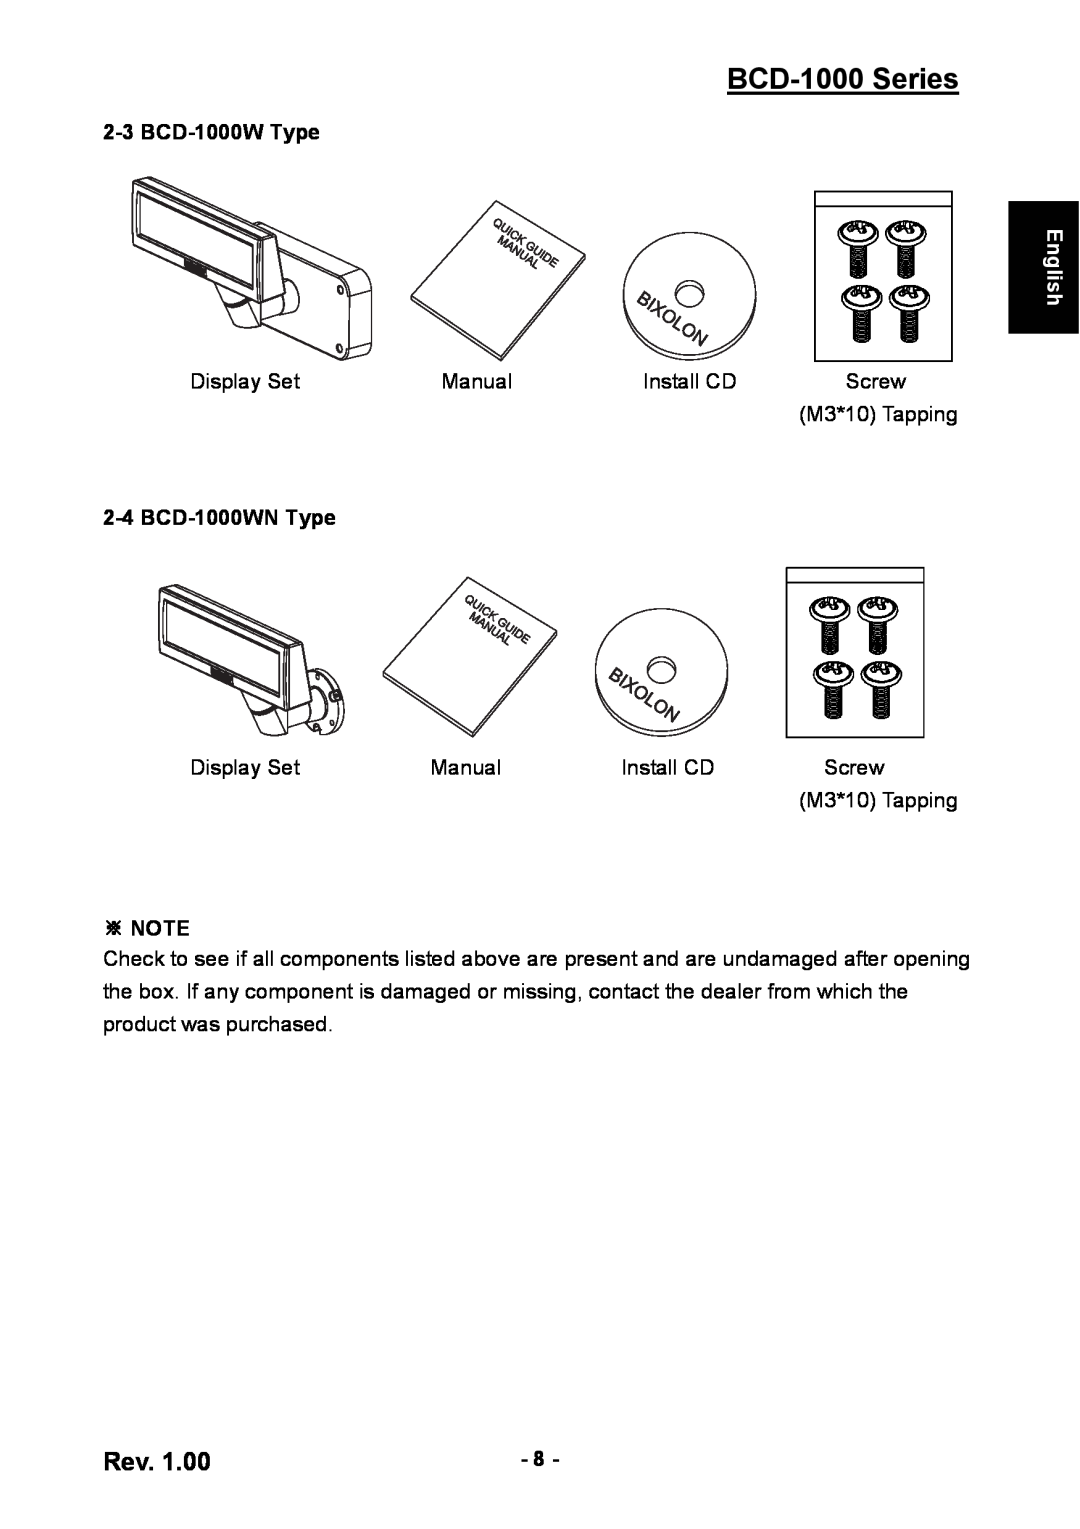 Samsung user manual BCD-1000W Type, BCD-1000WN Type, ※ Note, BCD-1000 Series, English 